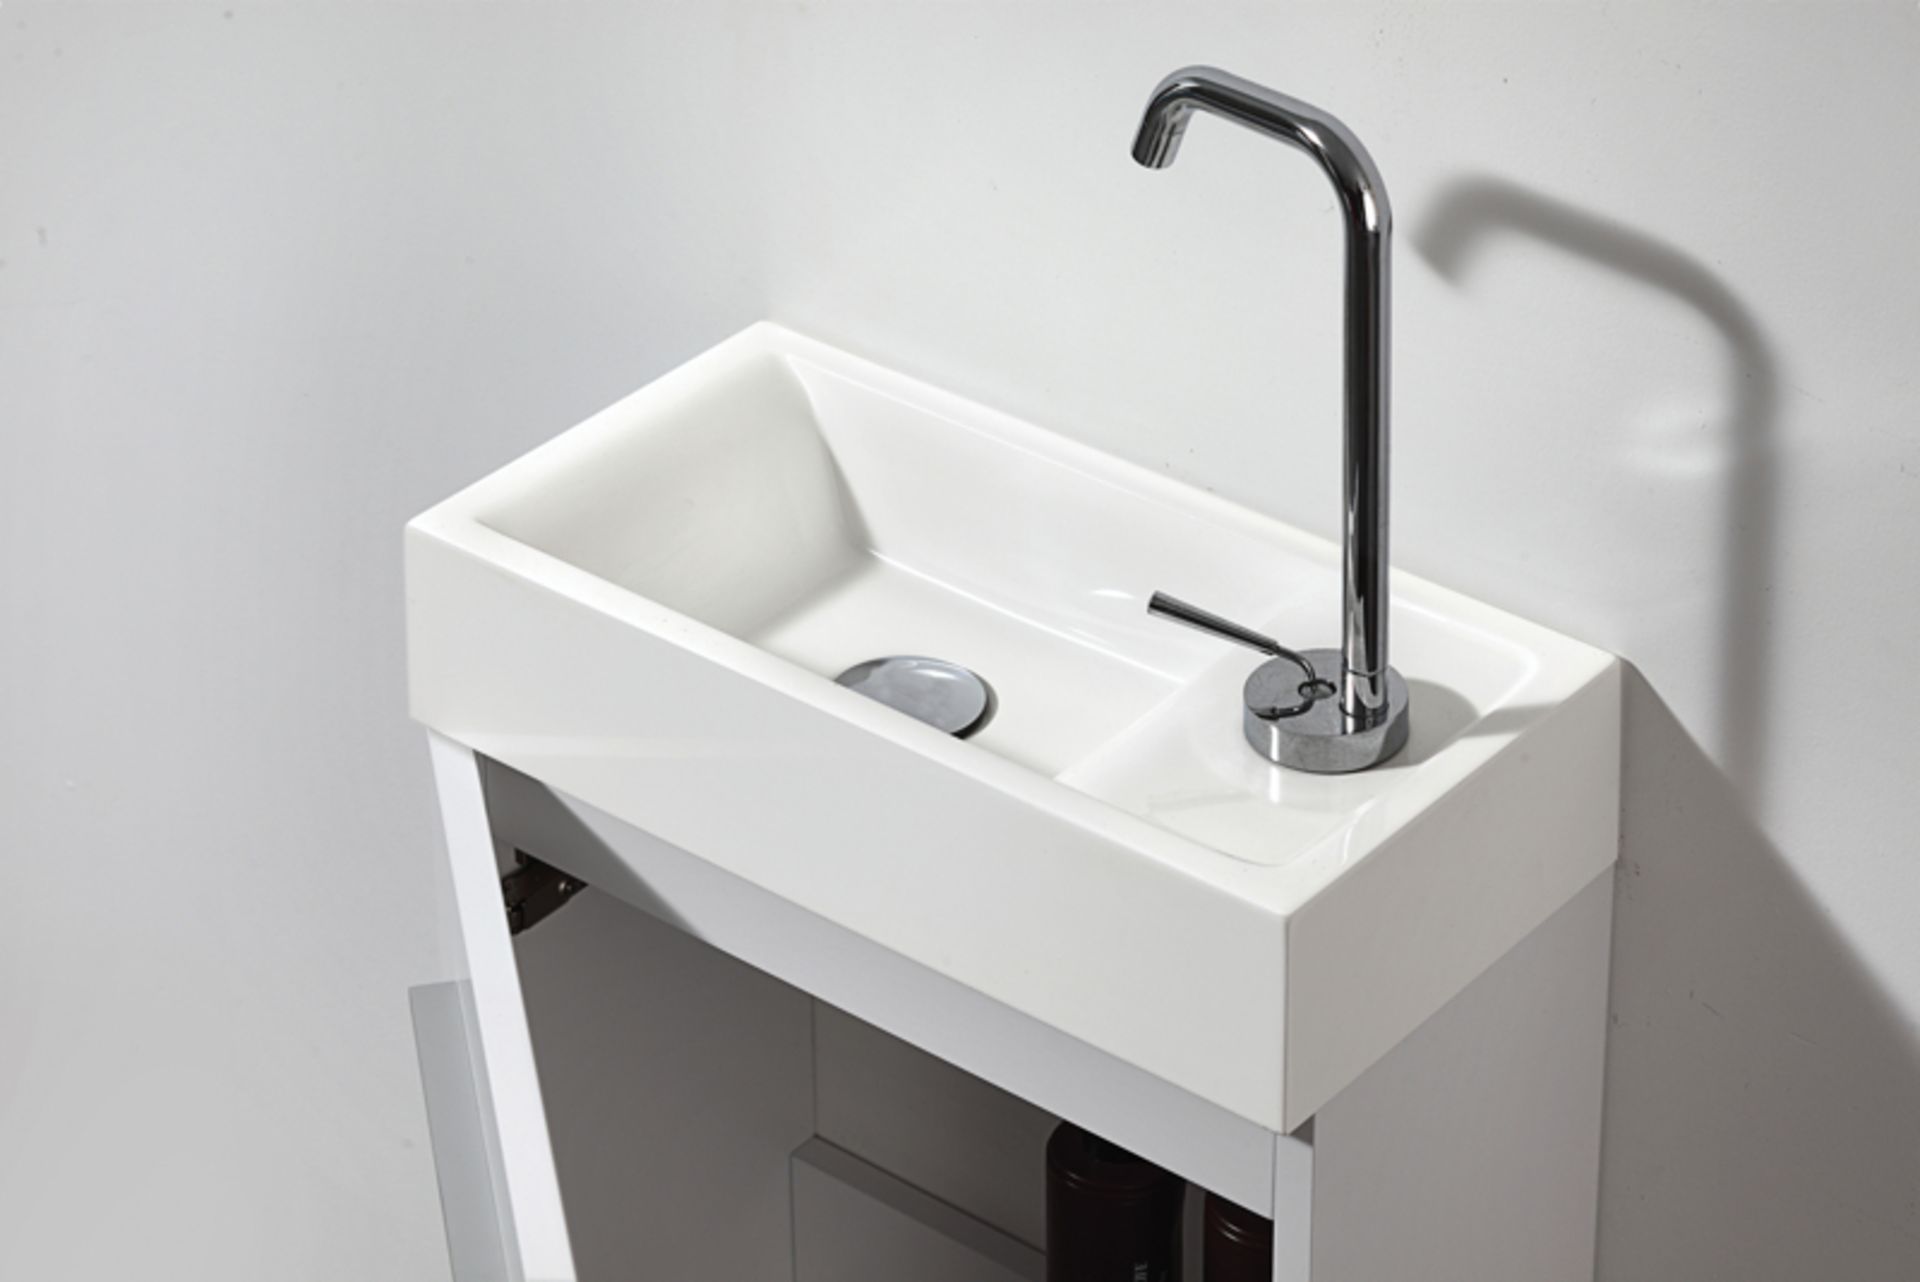 1 x MarbleTECH Mini Mount - A-Grade - Basin and Base Unit - Ref:ABS23-046 & AWS33-046 - CL170 - Loca - Image 3 of 4